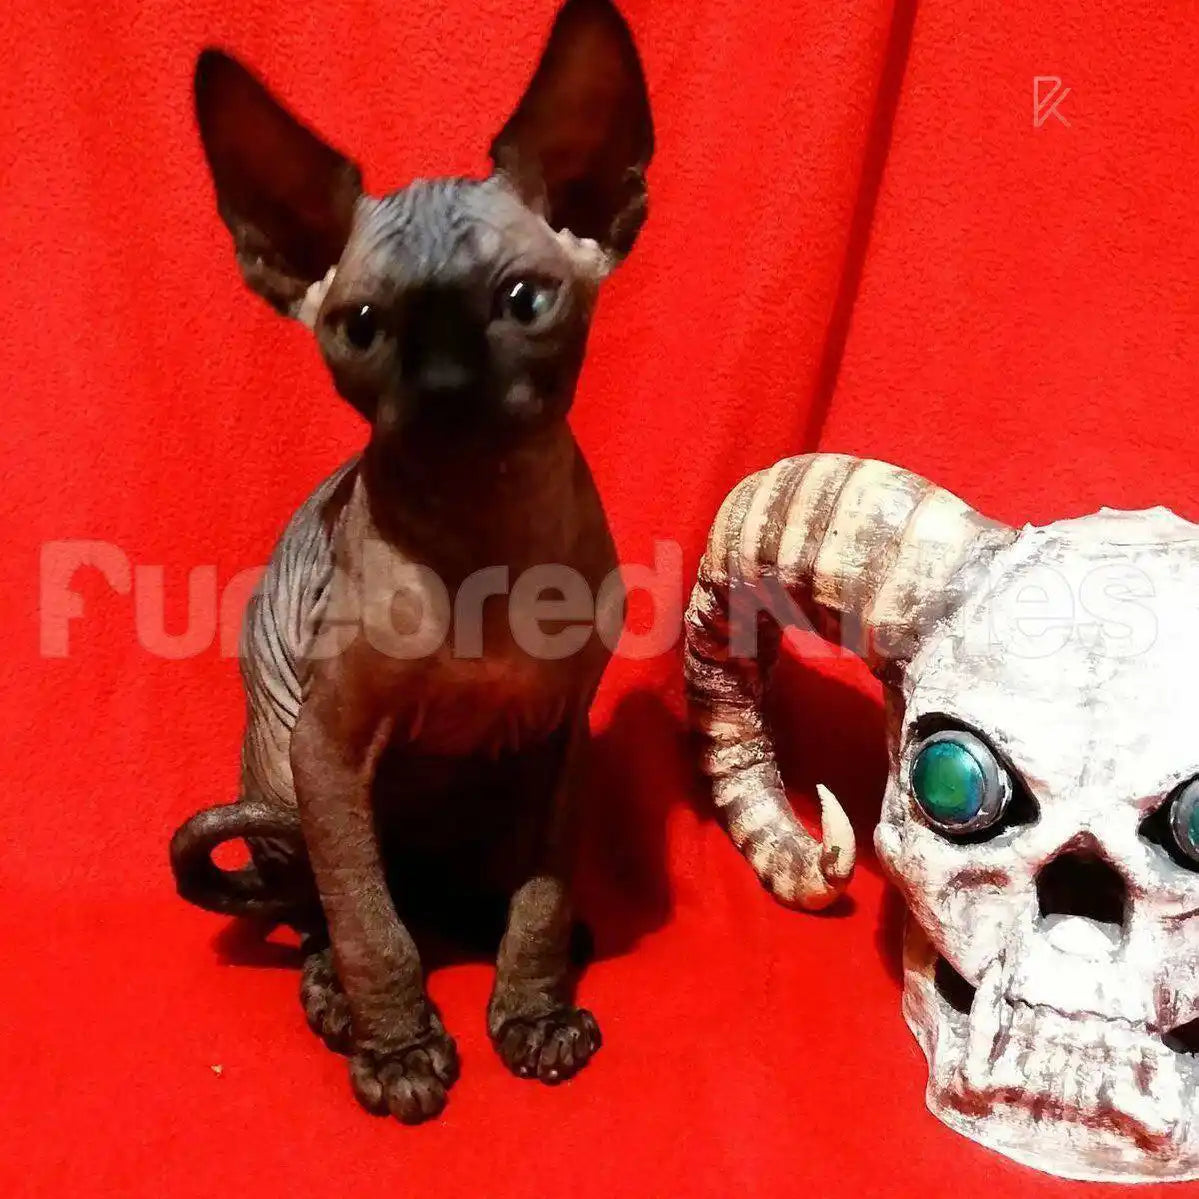 Merlin Male Sphynx Kitten | 3.5 Months Old | Available for